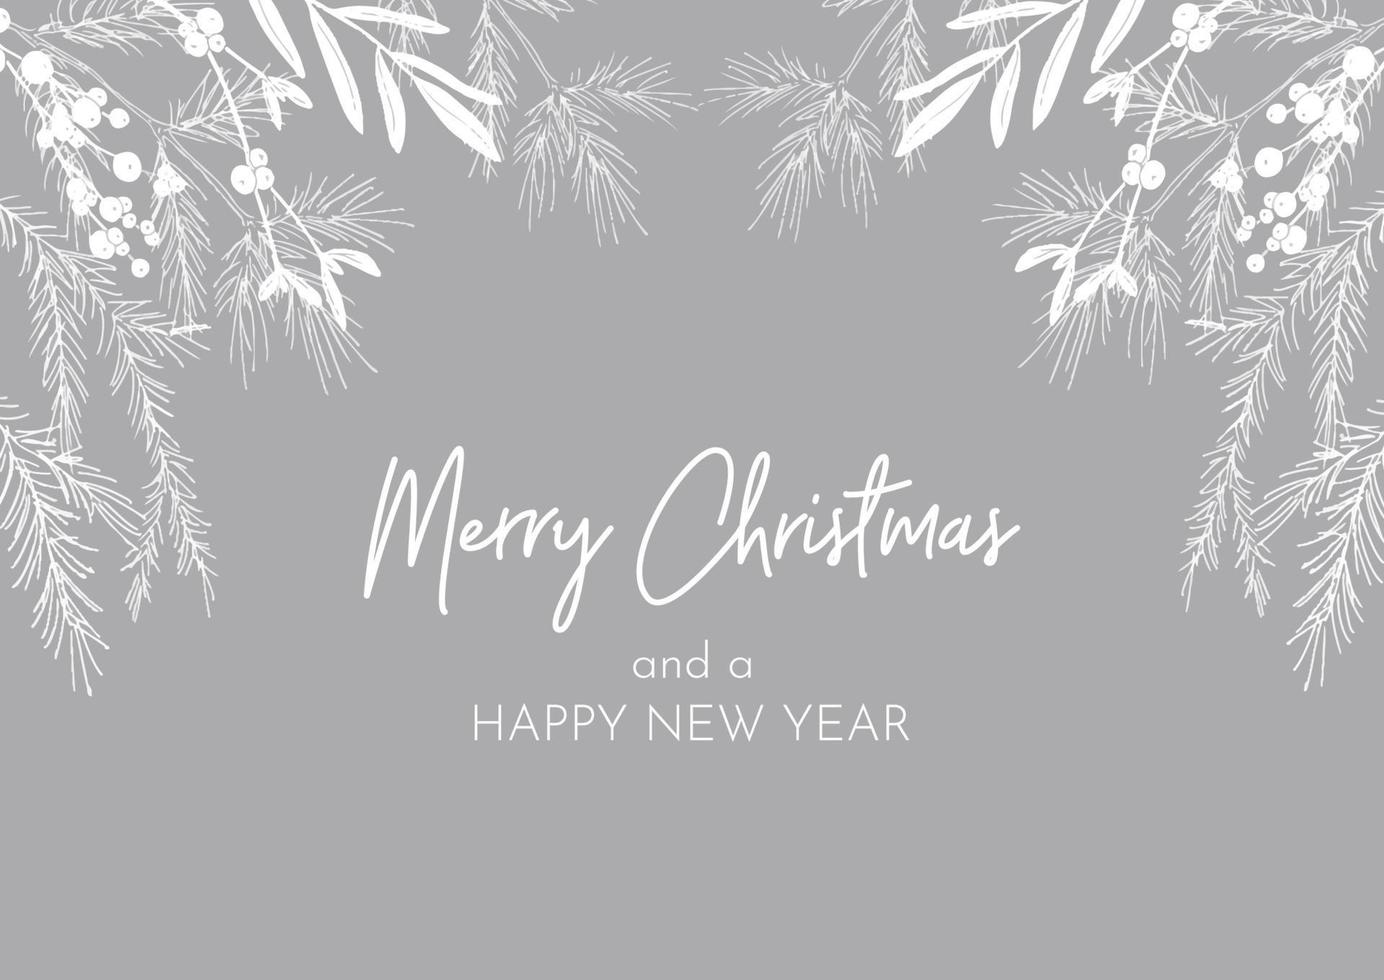 decorative hand drawn Christmas card background vector